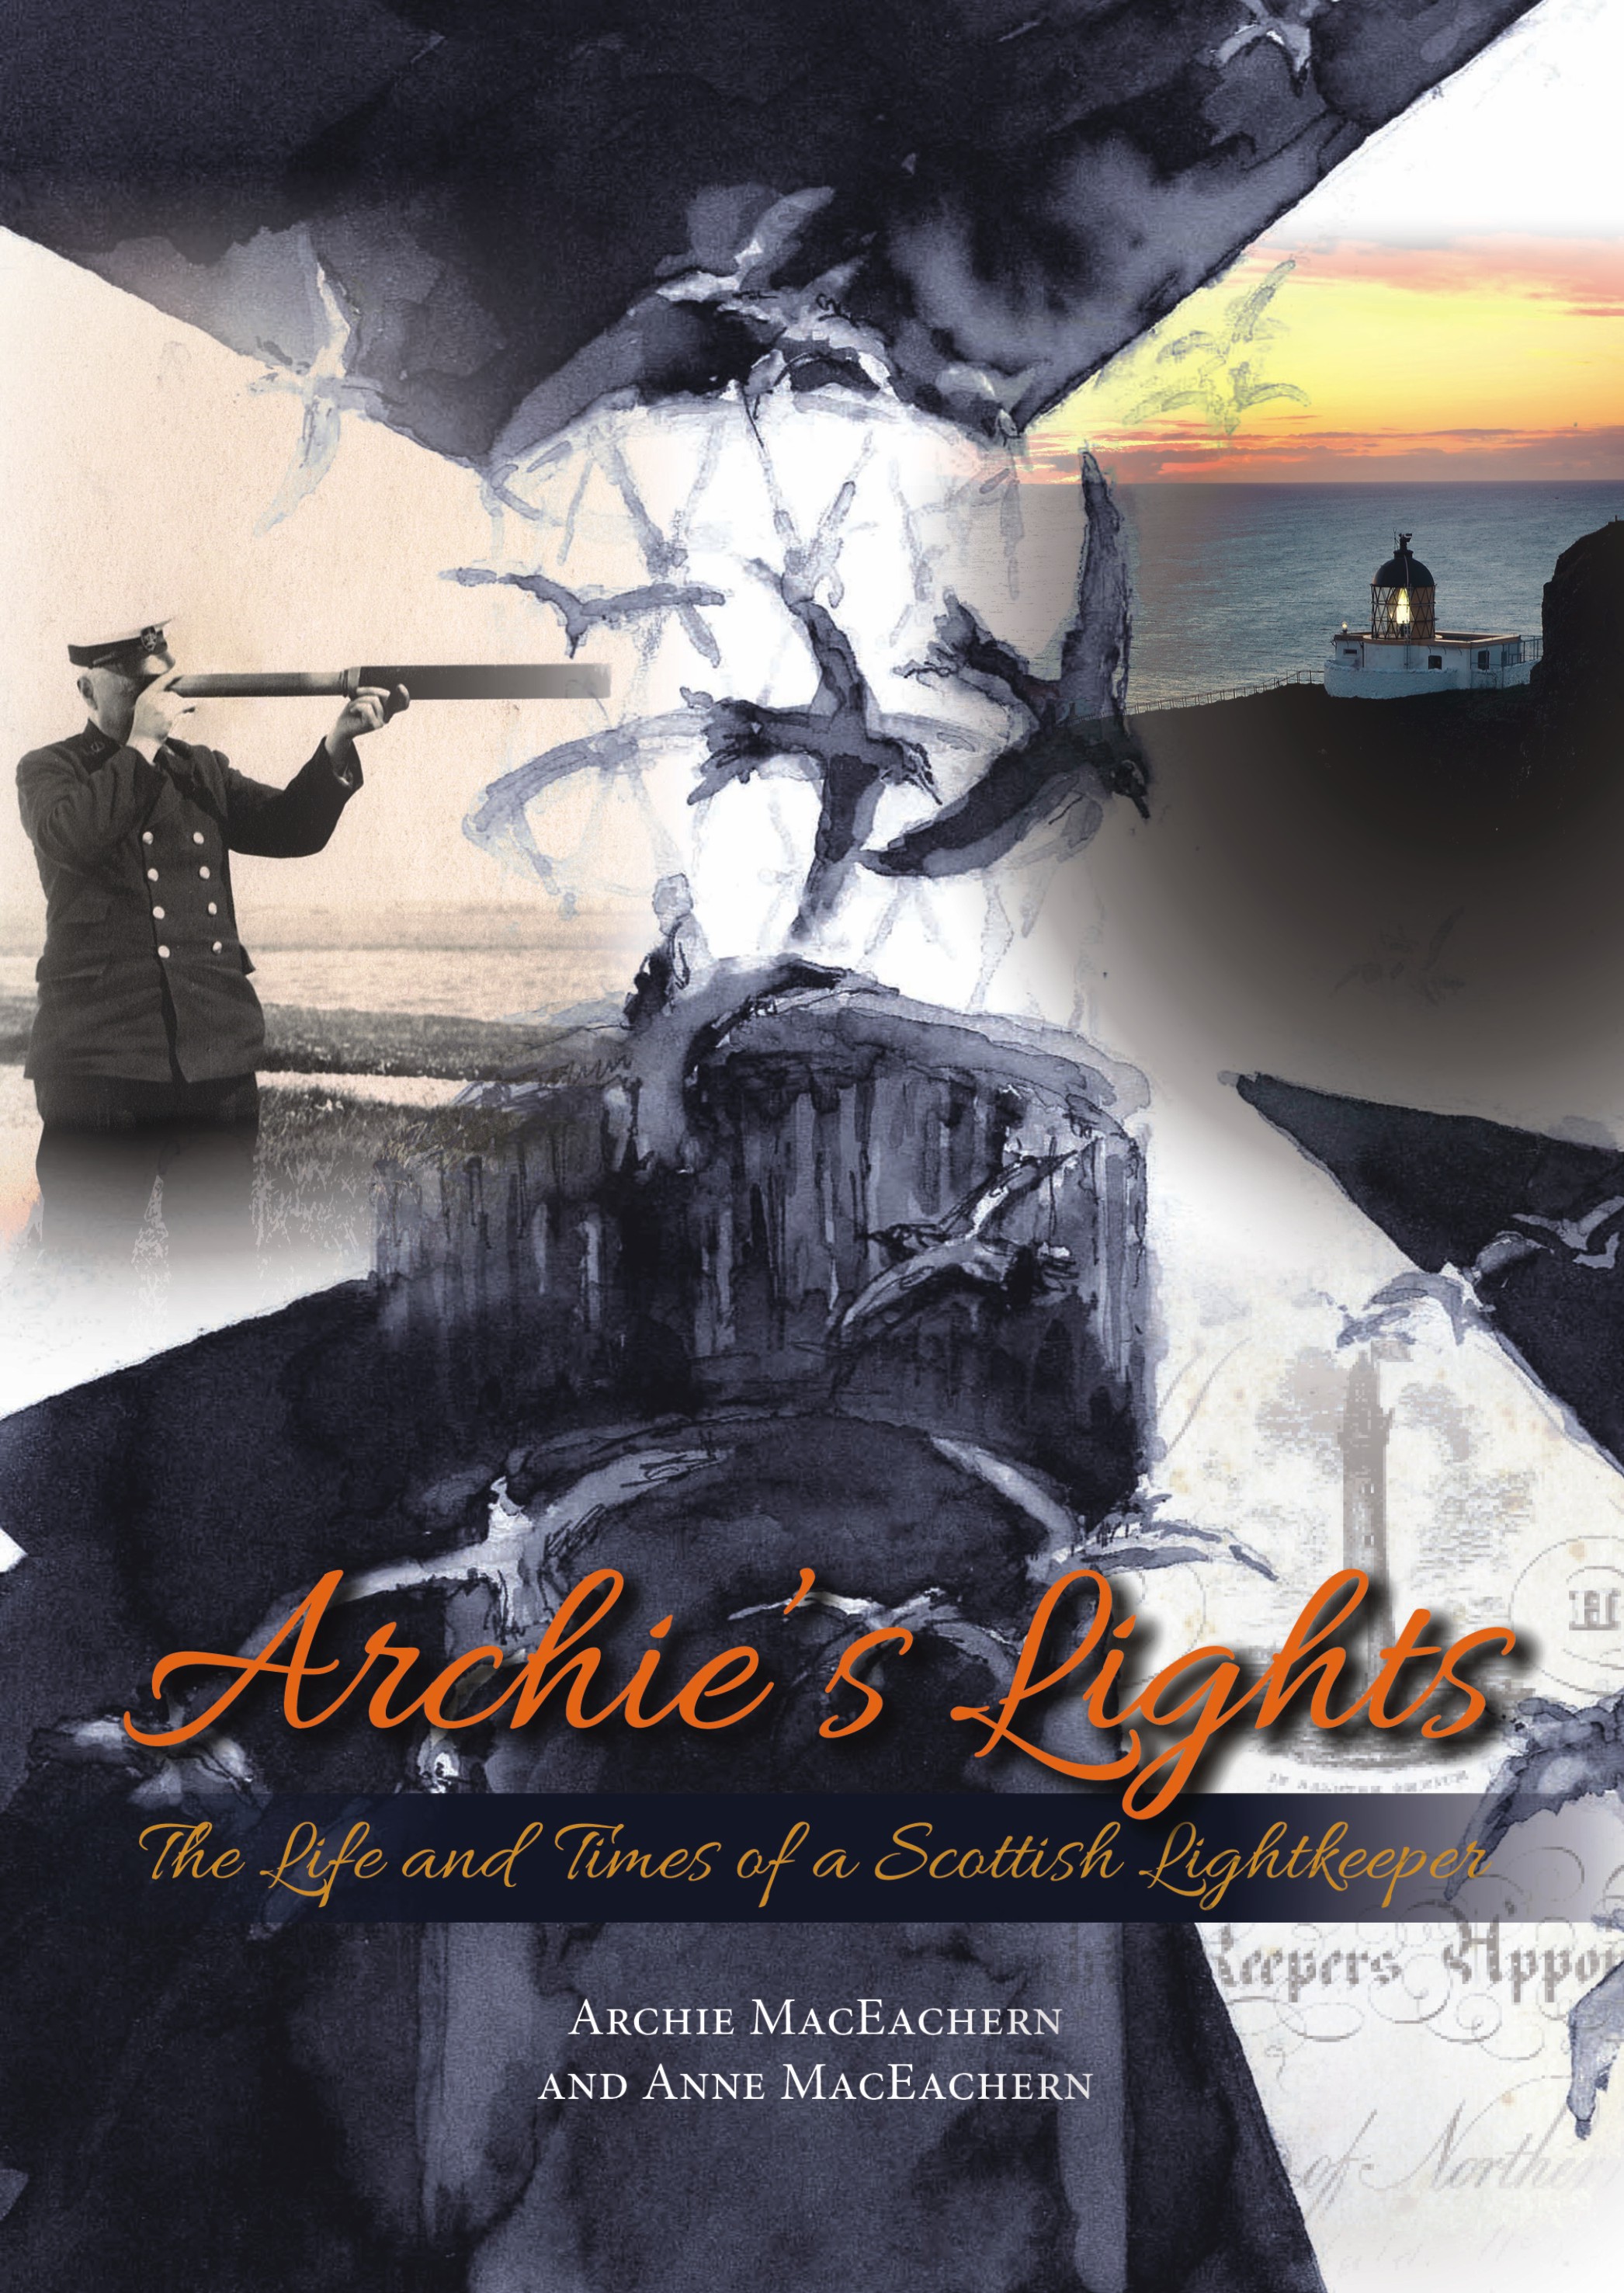 Archie's Lights reveals the extraordinary life of a Scottish lighthouse keeper.